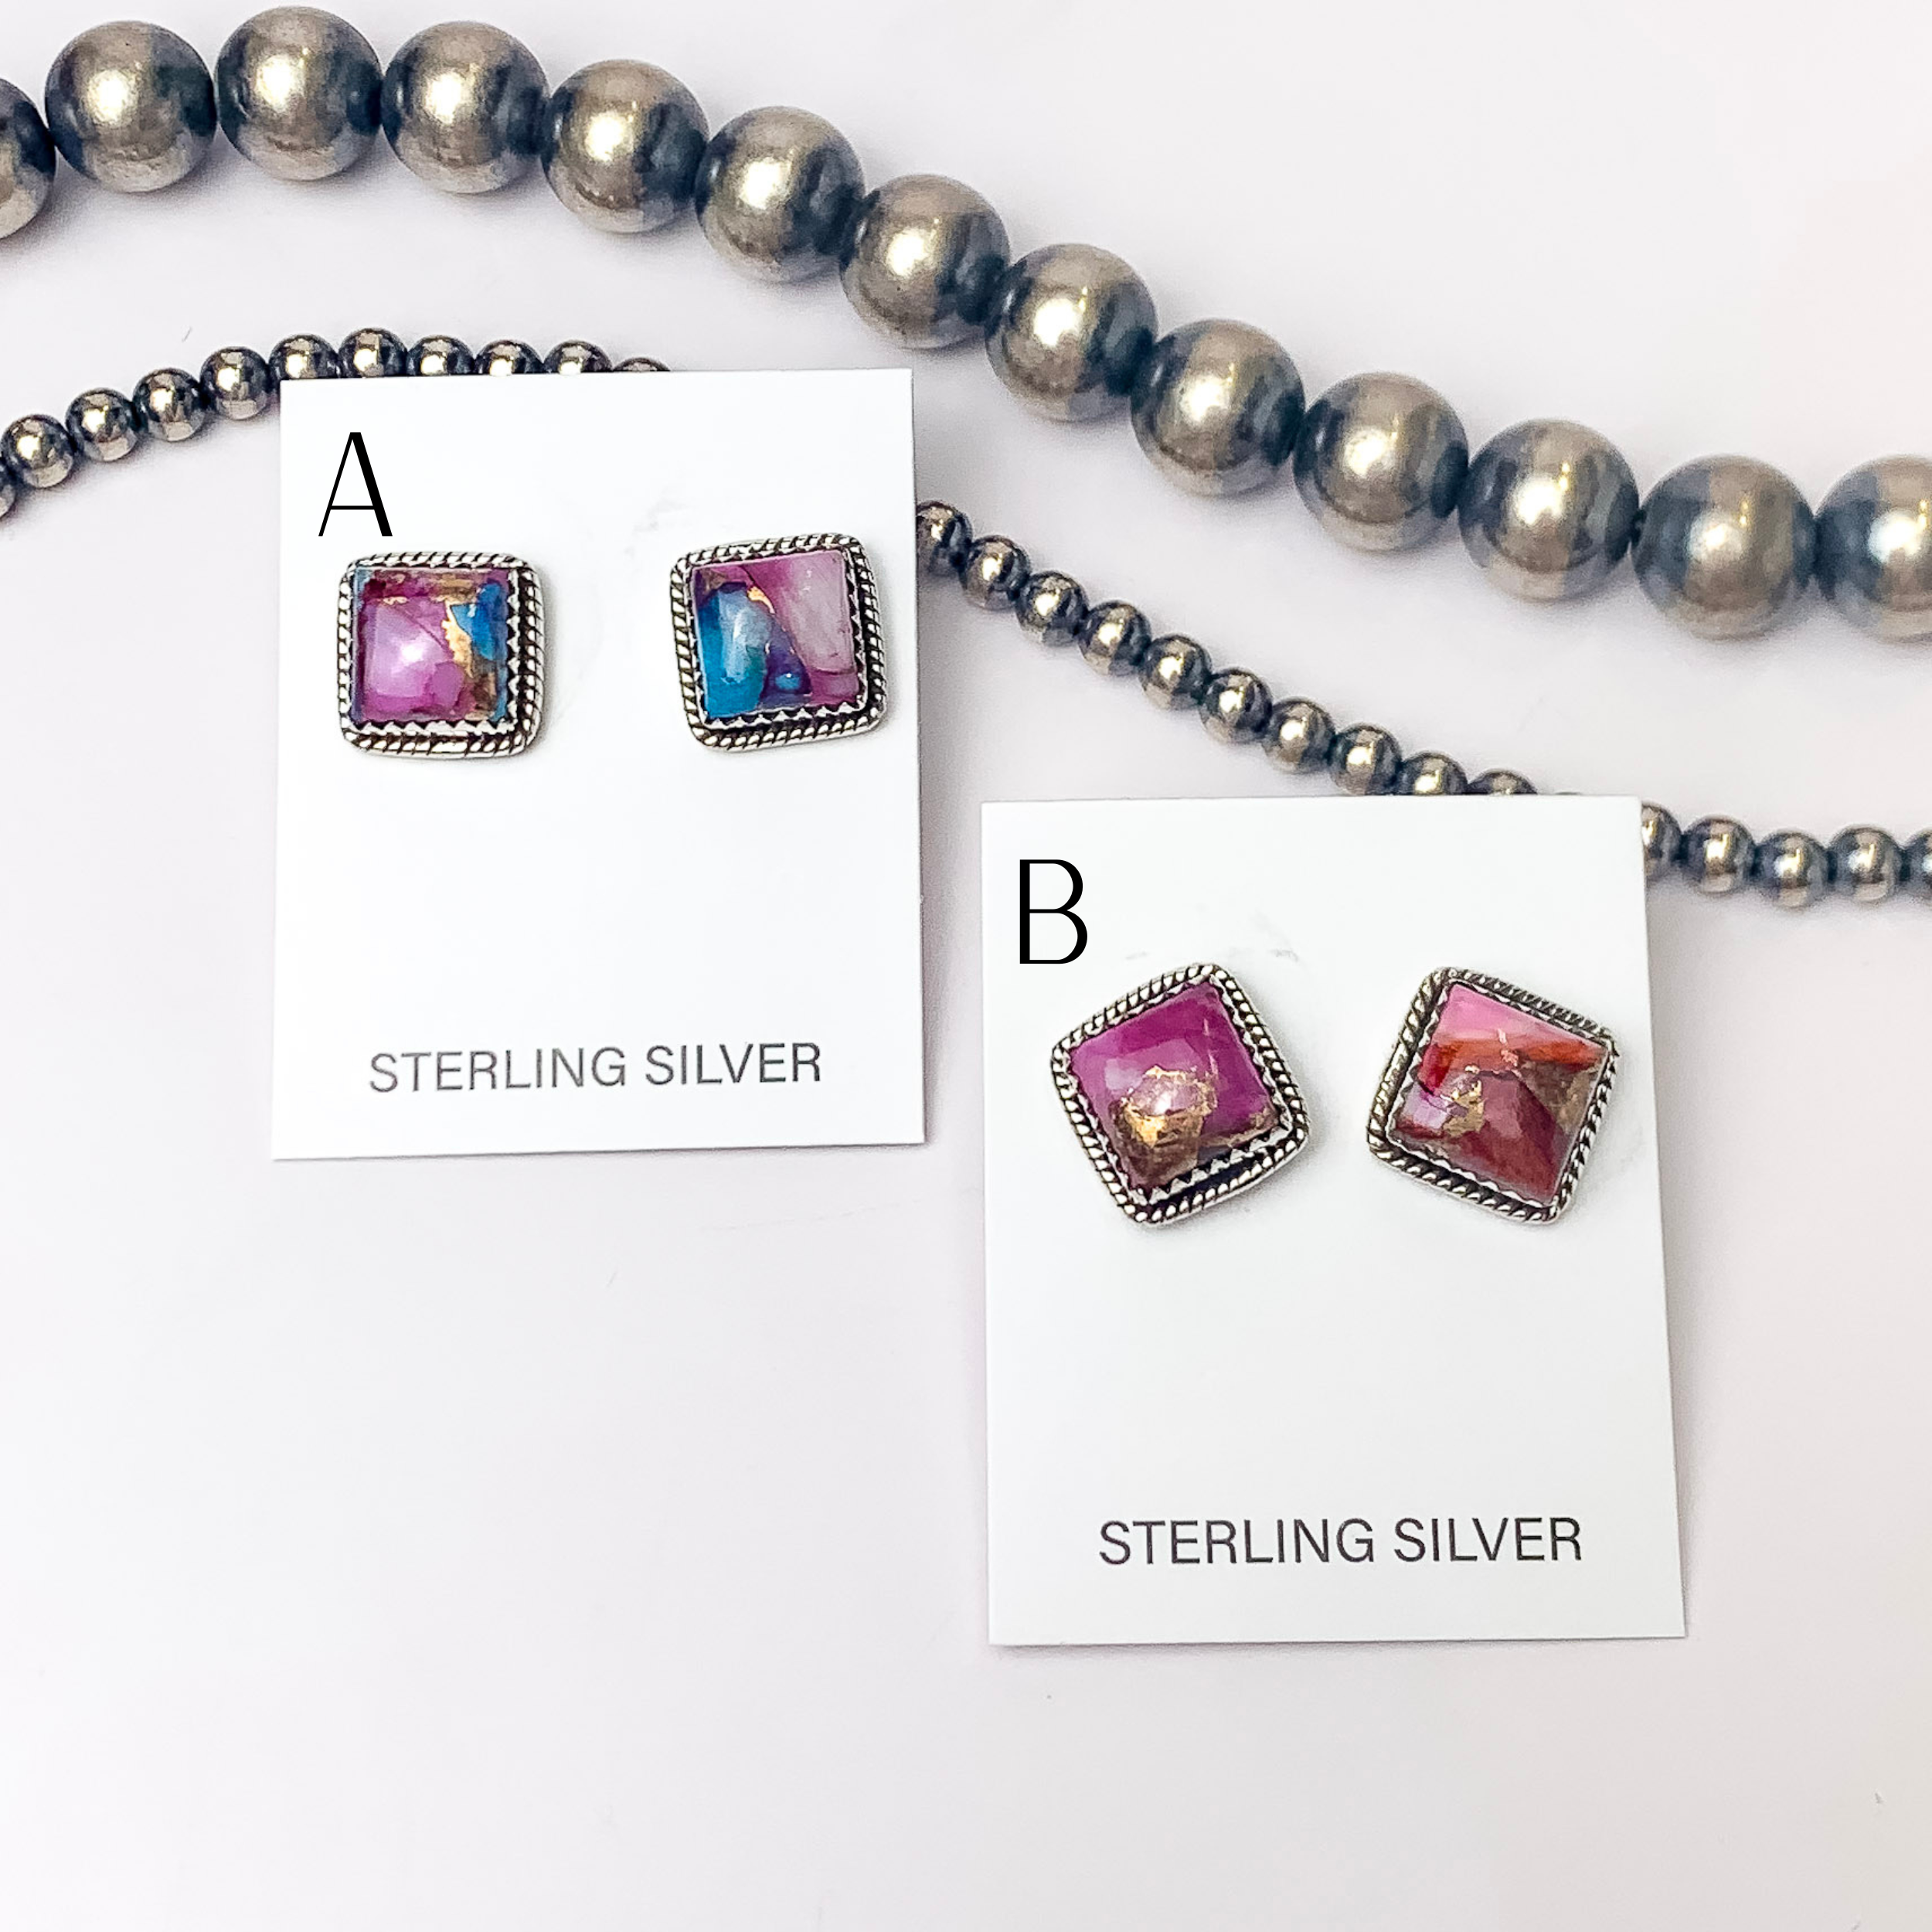 Hada Collection | Handmade Sterling Silver Square Stud Earrings with Purple Dhalia Remix Stones - Giddy Up Glamour Boutique